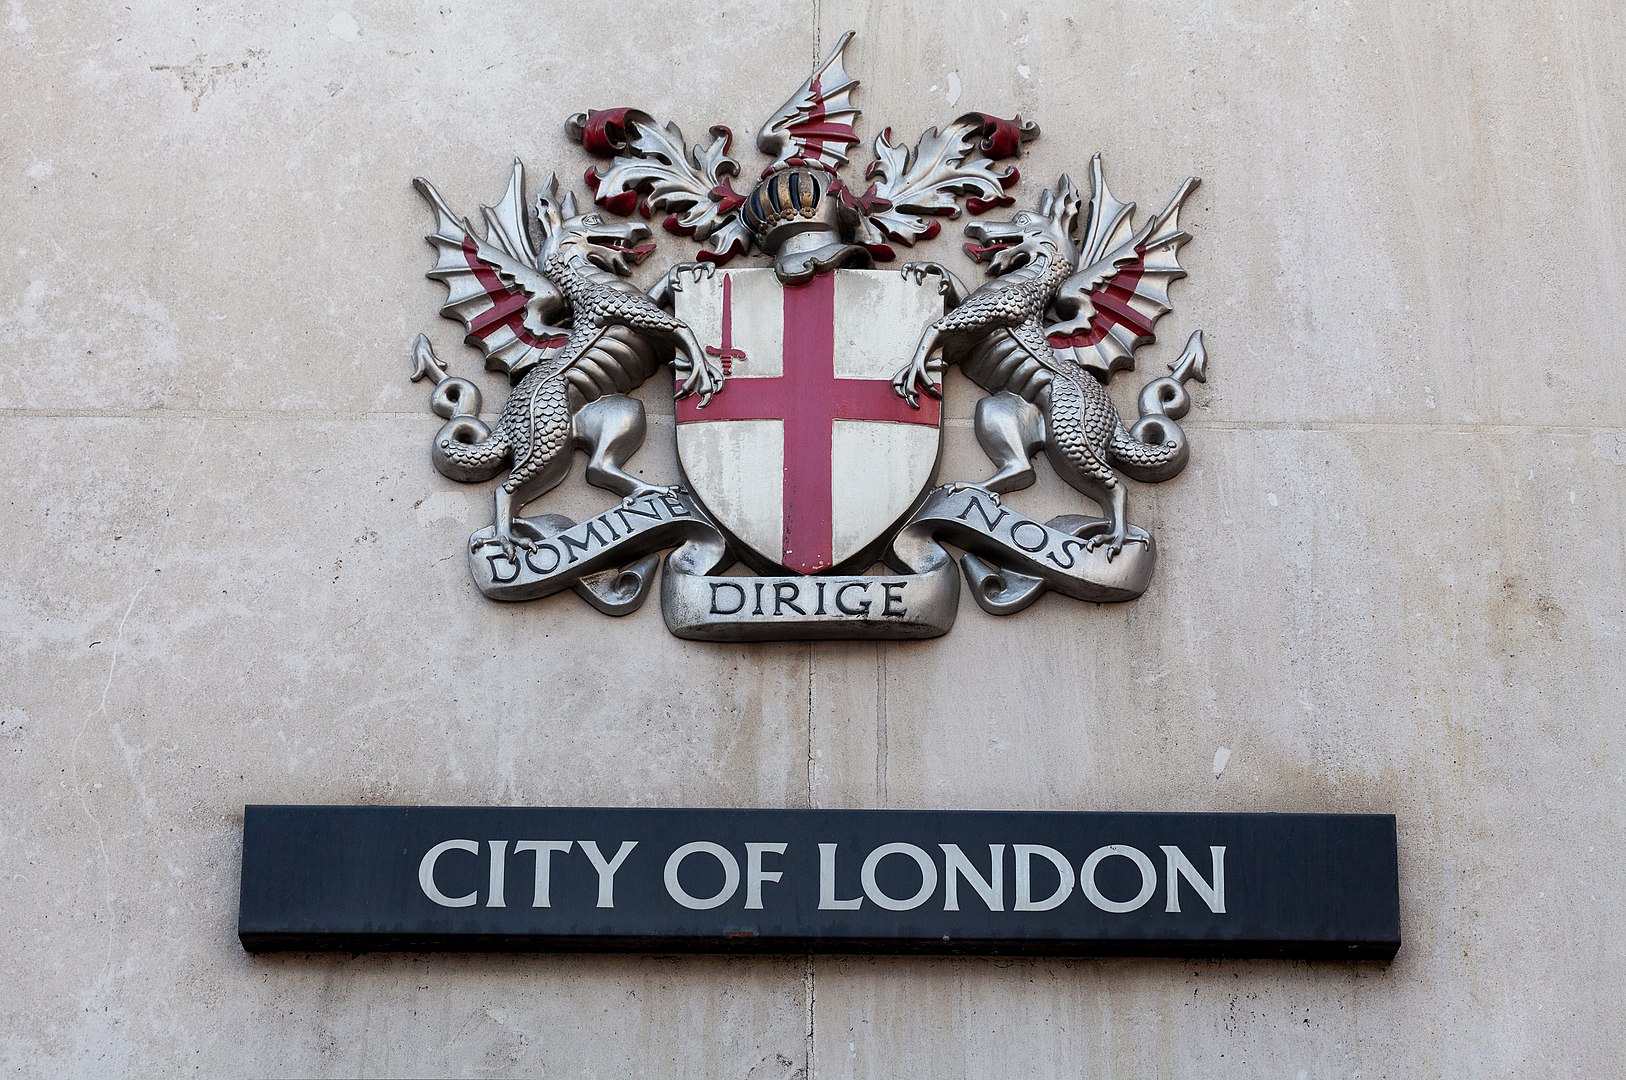 City of London the Largest International Financial Centre in the World and British Overseas Territories